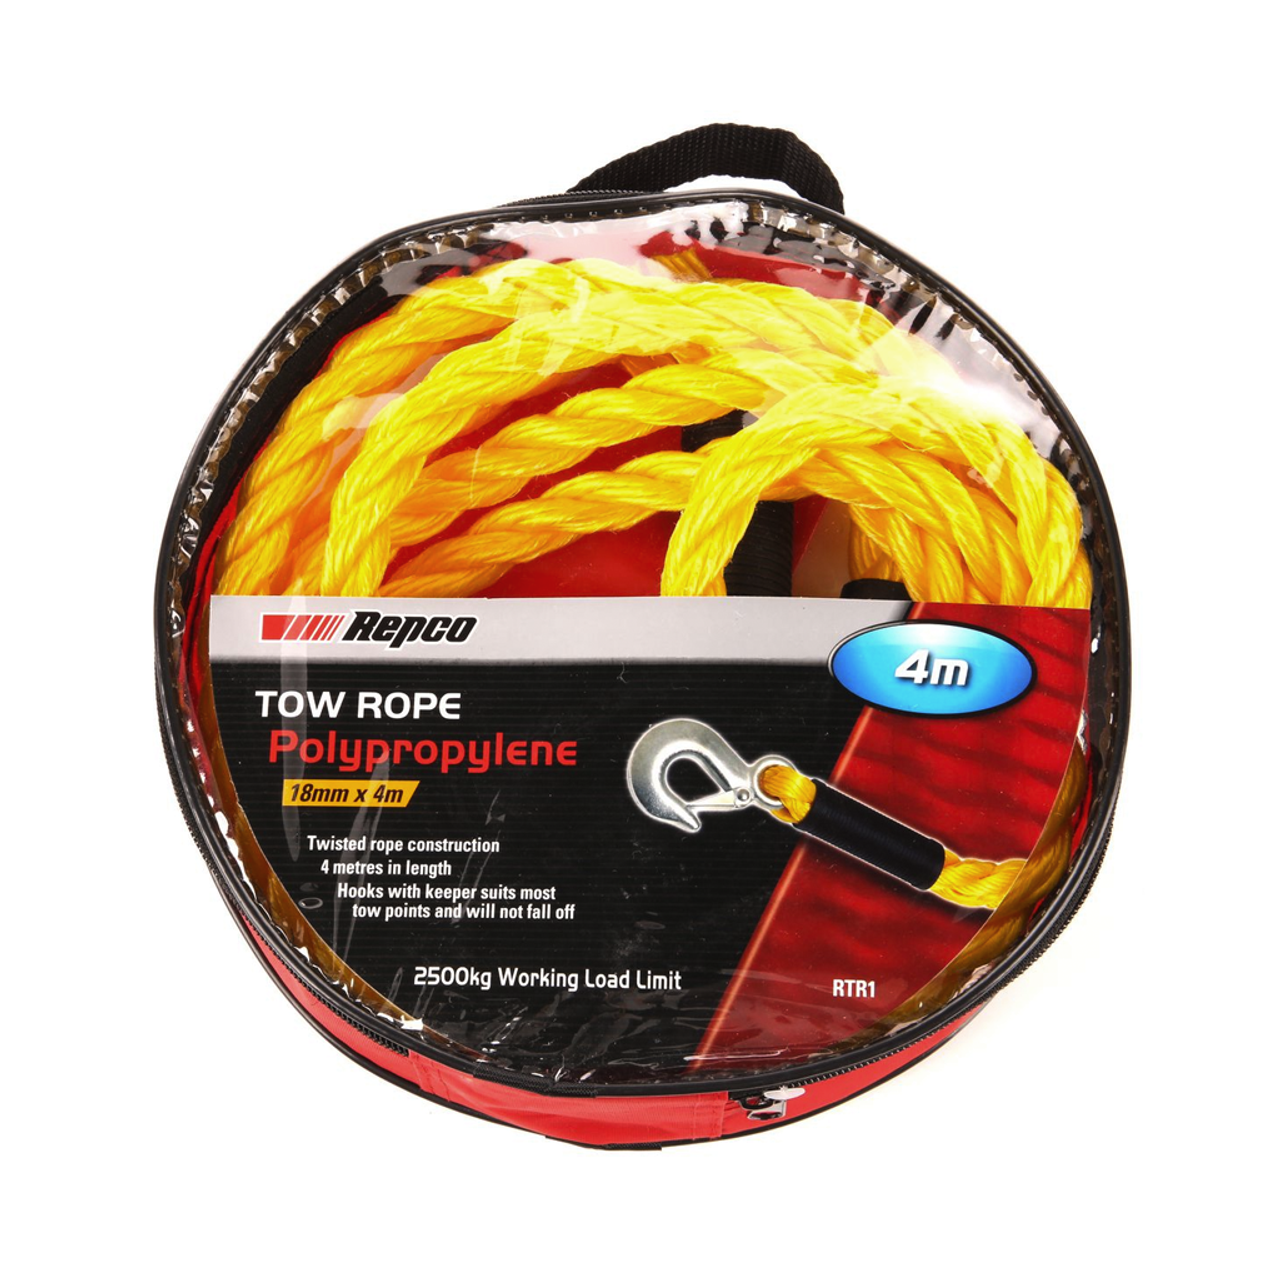 Repco Tow Rope - Dutchy's